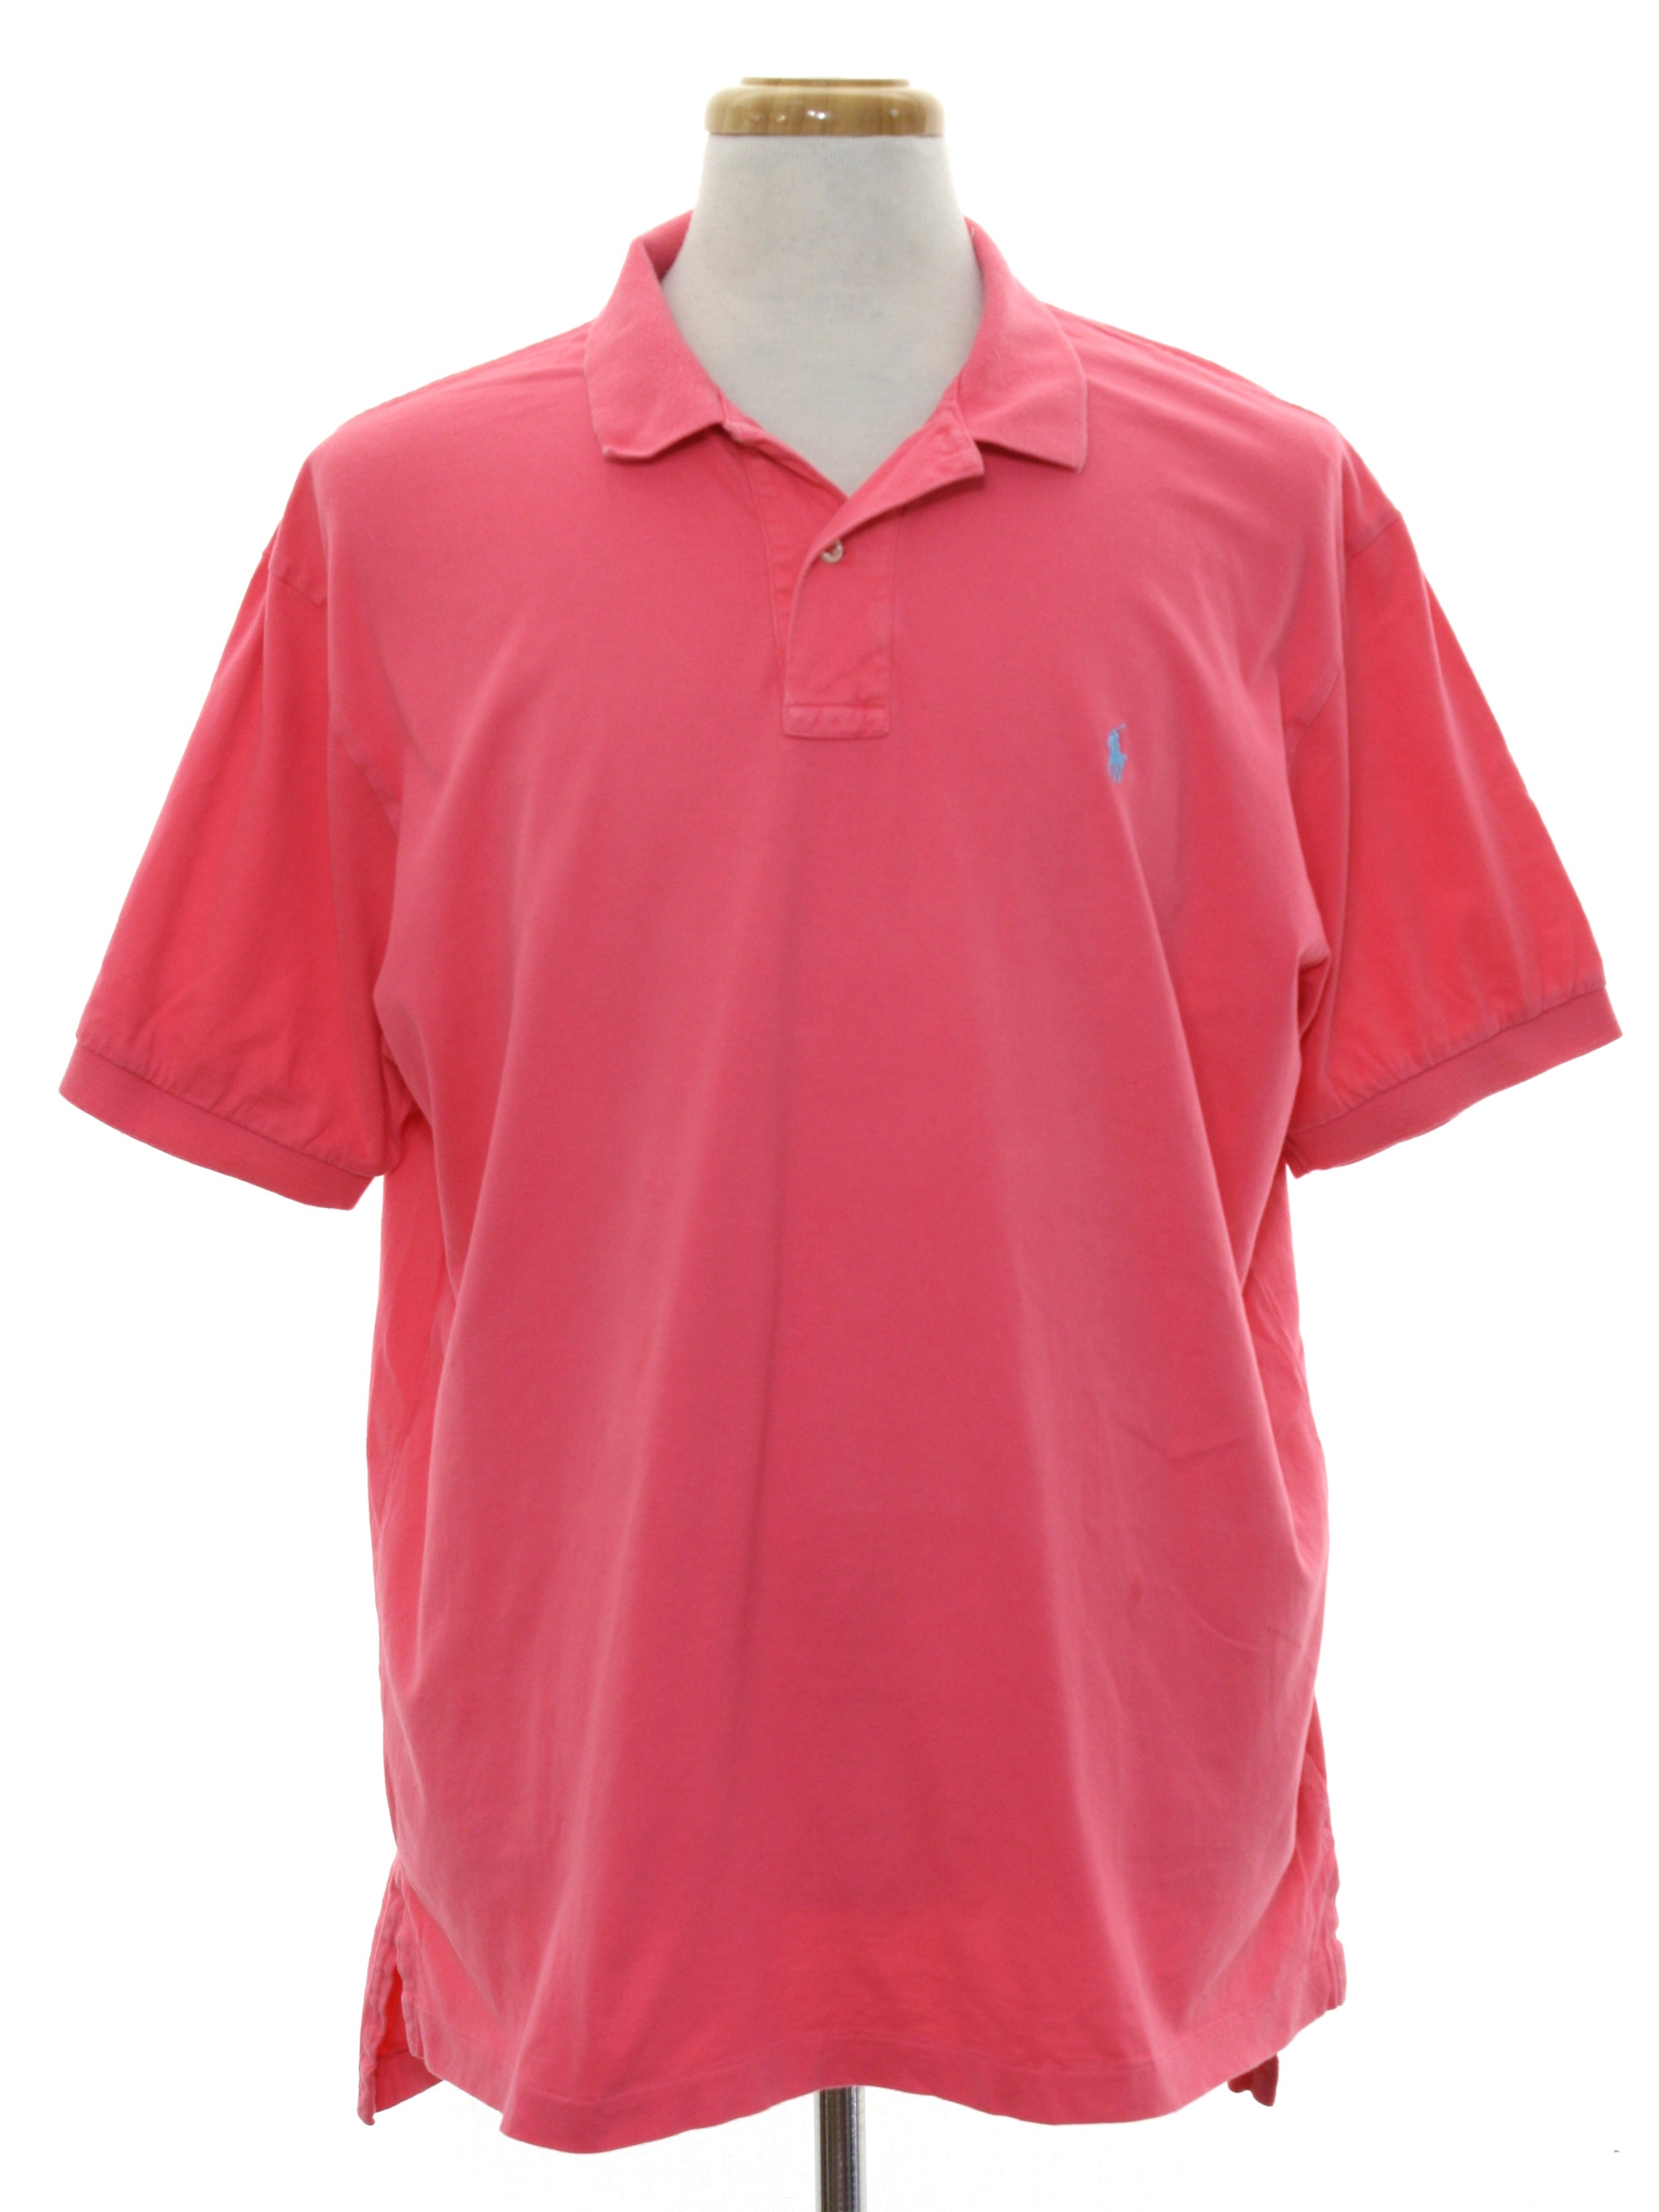 Shirt: (made in 90s) -Polo by Ralph Lauren- Mens watermelon pink